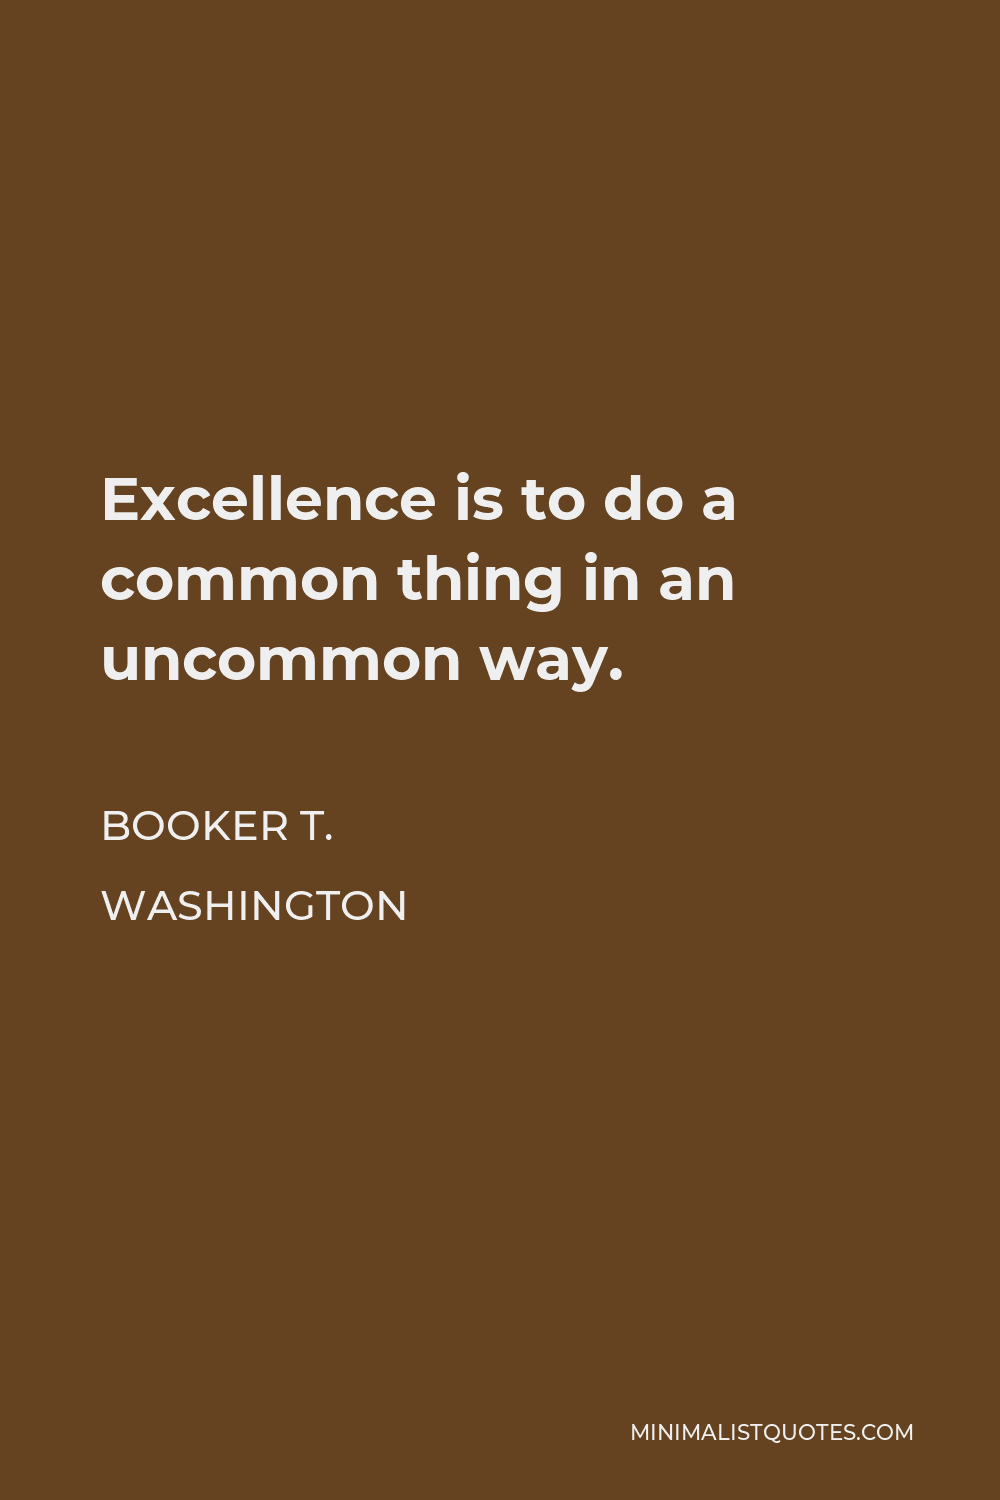 Booker T. Washington Quote - Excellence is to do a common thing in an uncommon way.